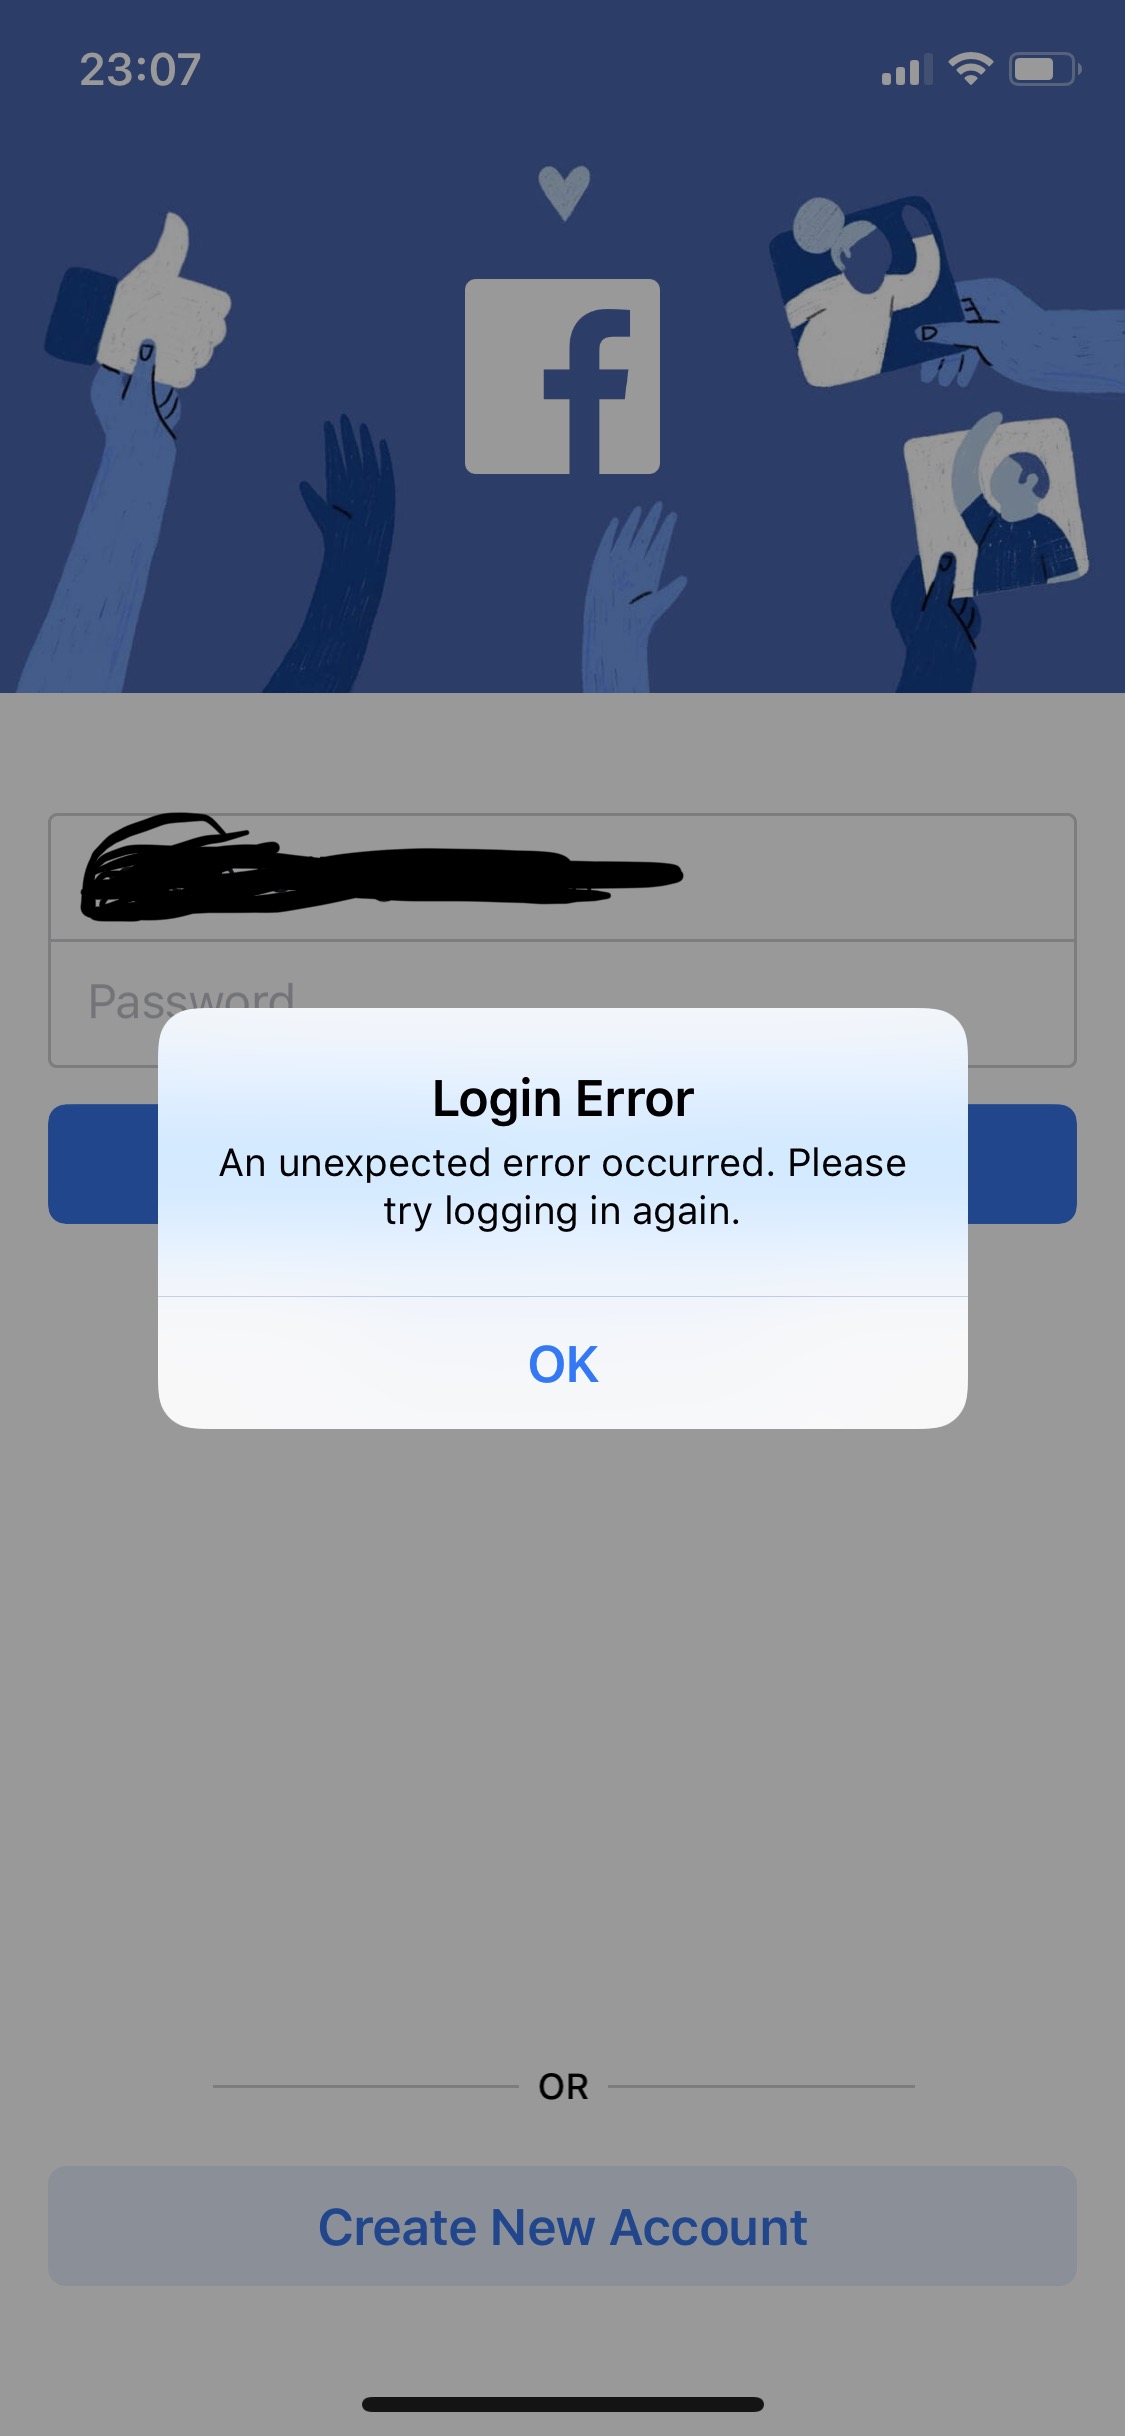 Does anyone know how to fix this error when logging in using FB